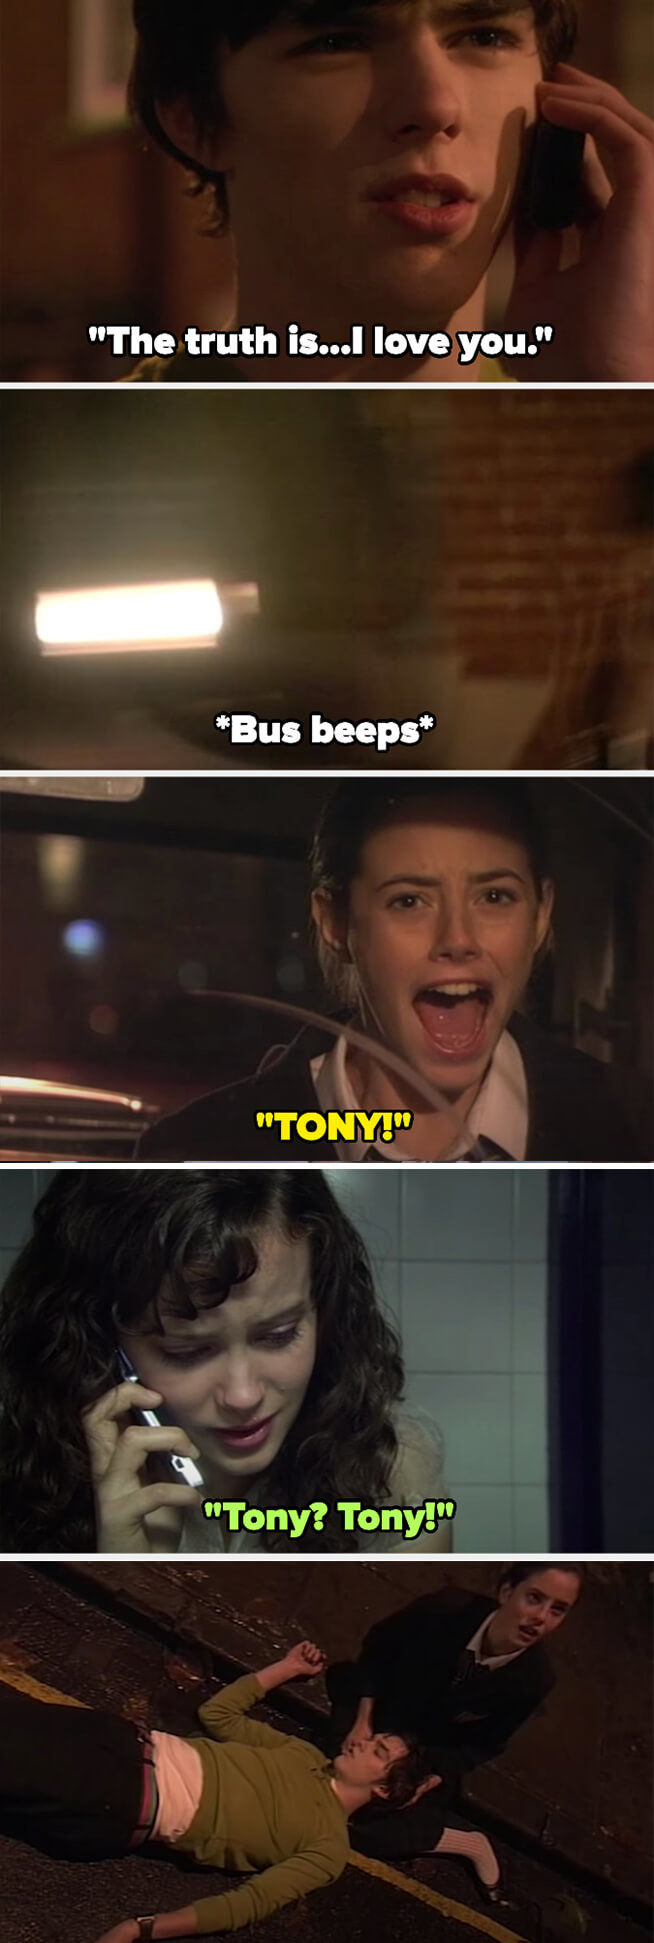 Tony tells Michelle on the phone that he loves her, then is hit by a bus as Effy screams, and Michelle asks &quot;tony? tony?&quot; on the other end of the phone